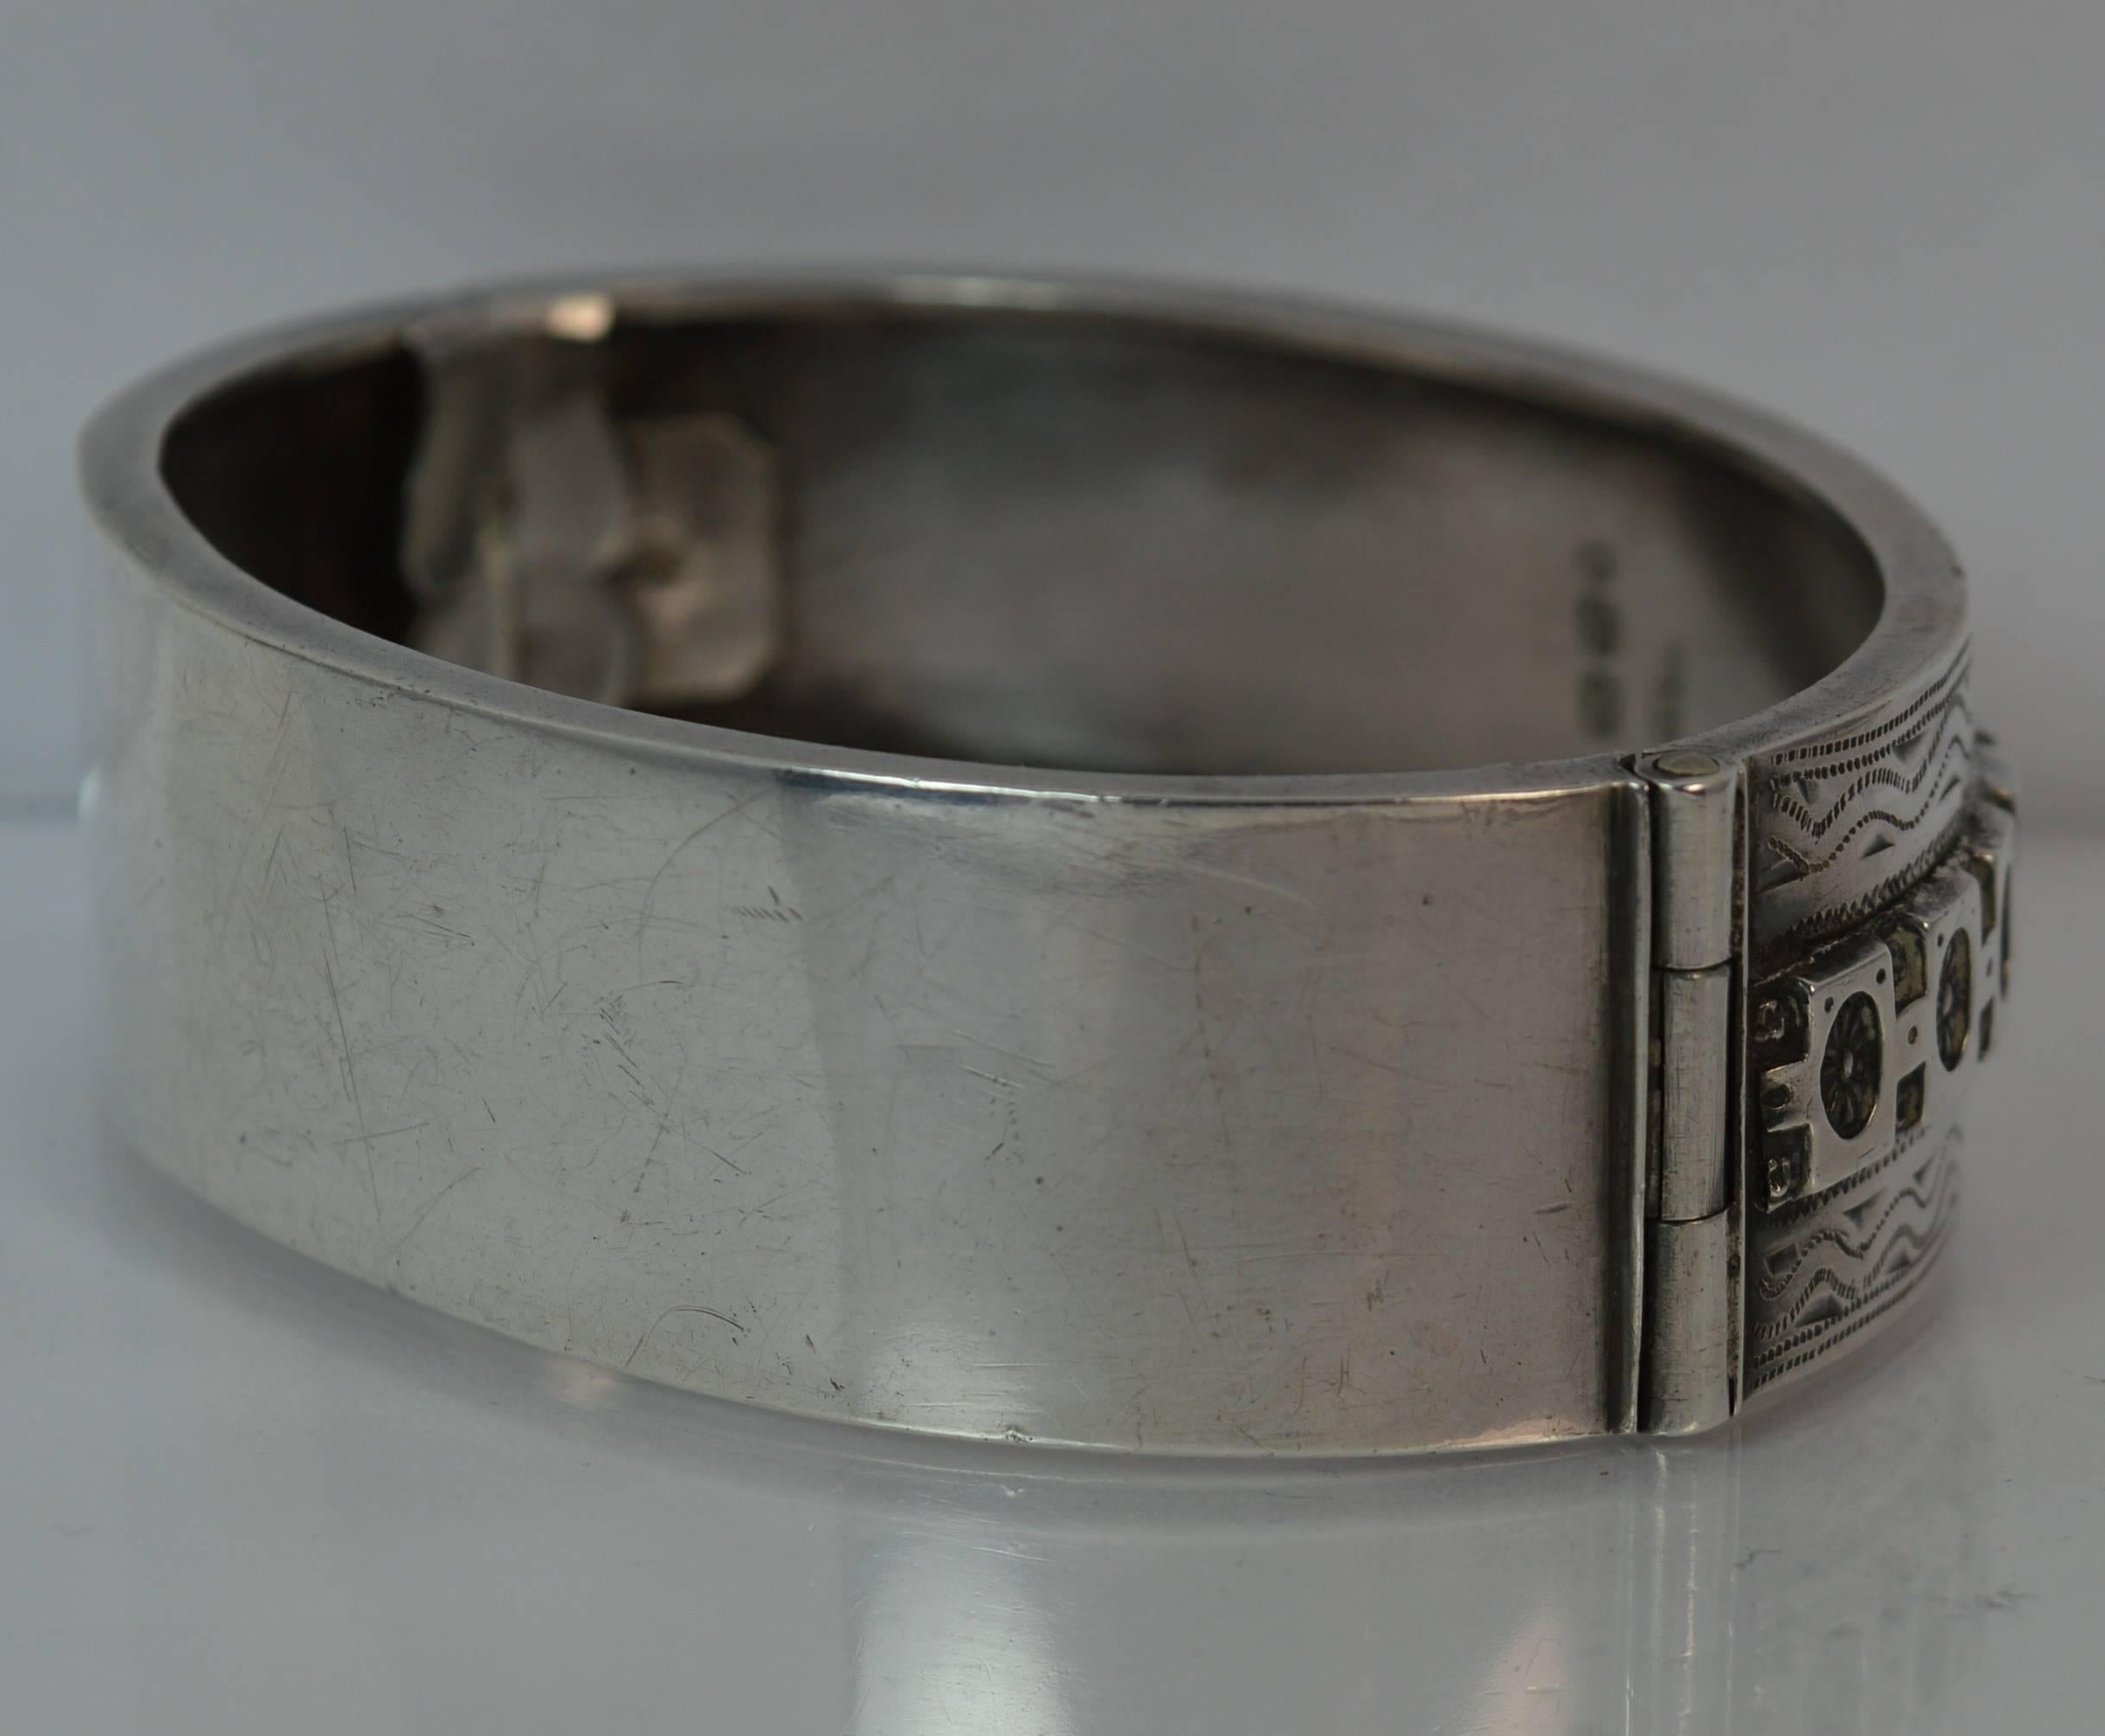 Women's 1884 Victorian Aesthetic Period Solid Silver Bangle